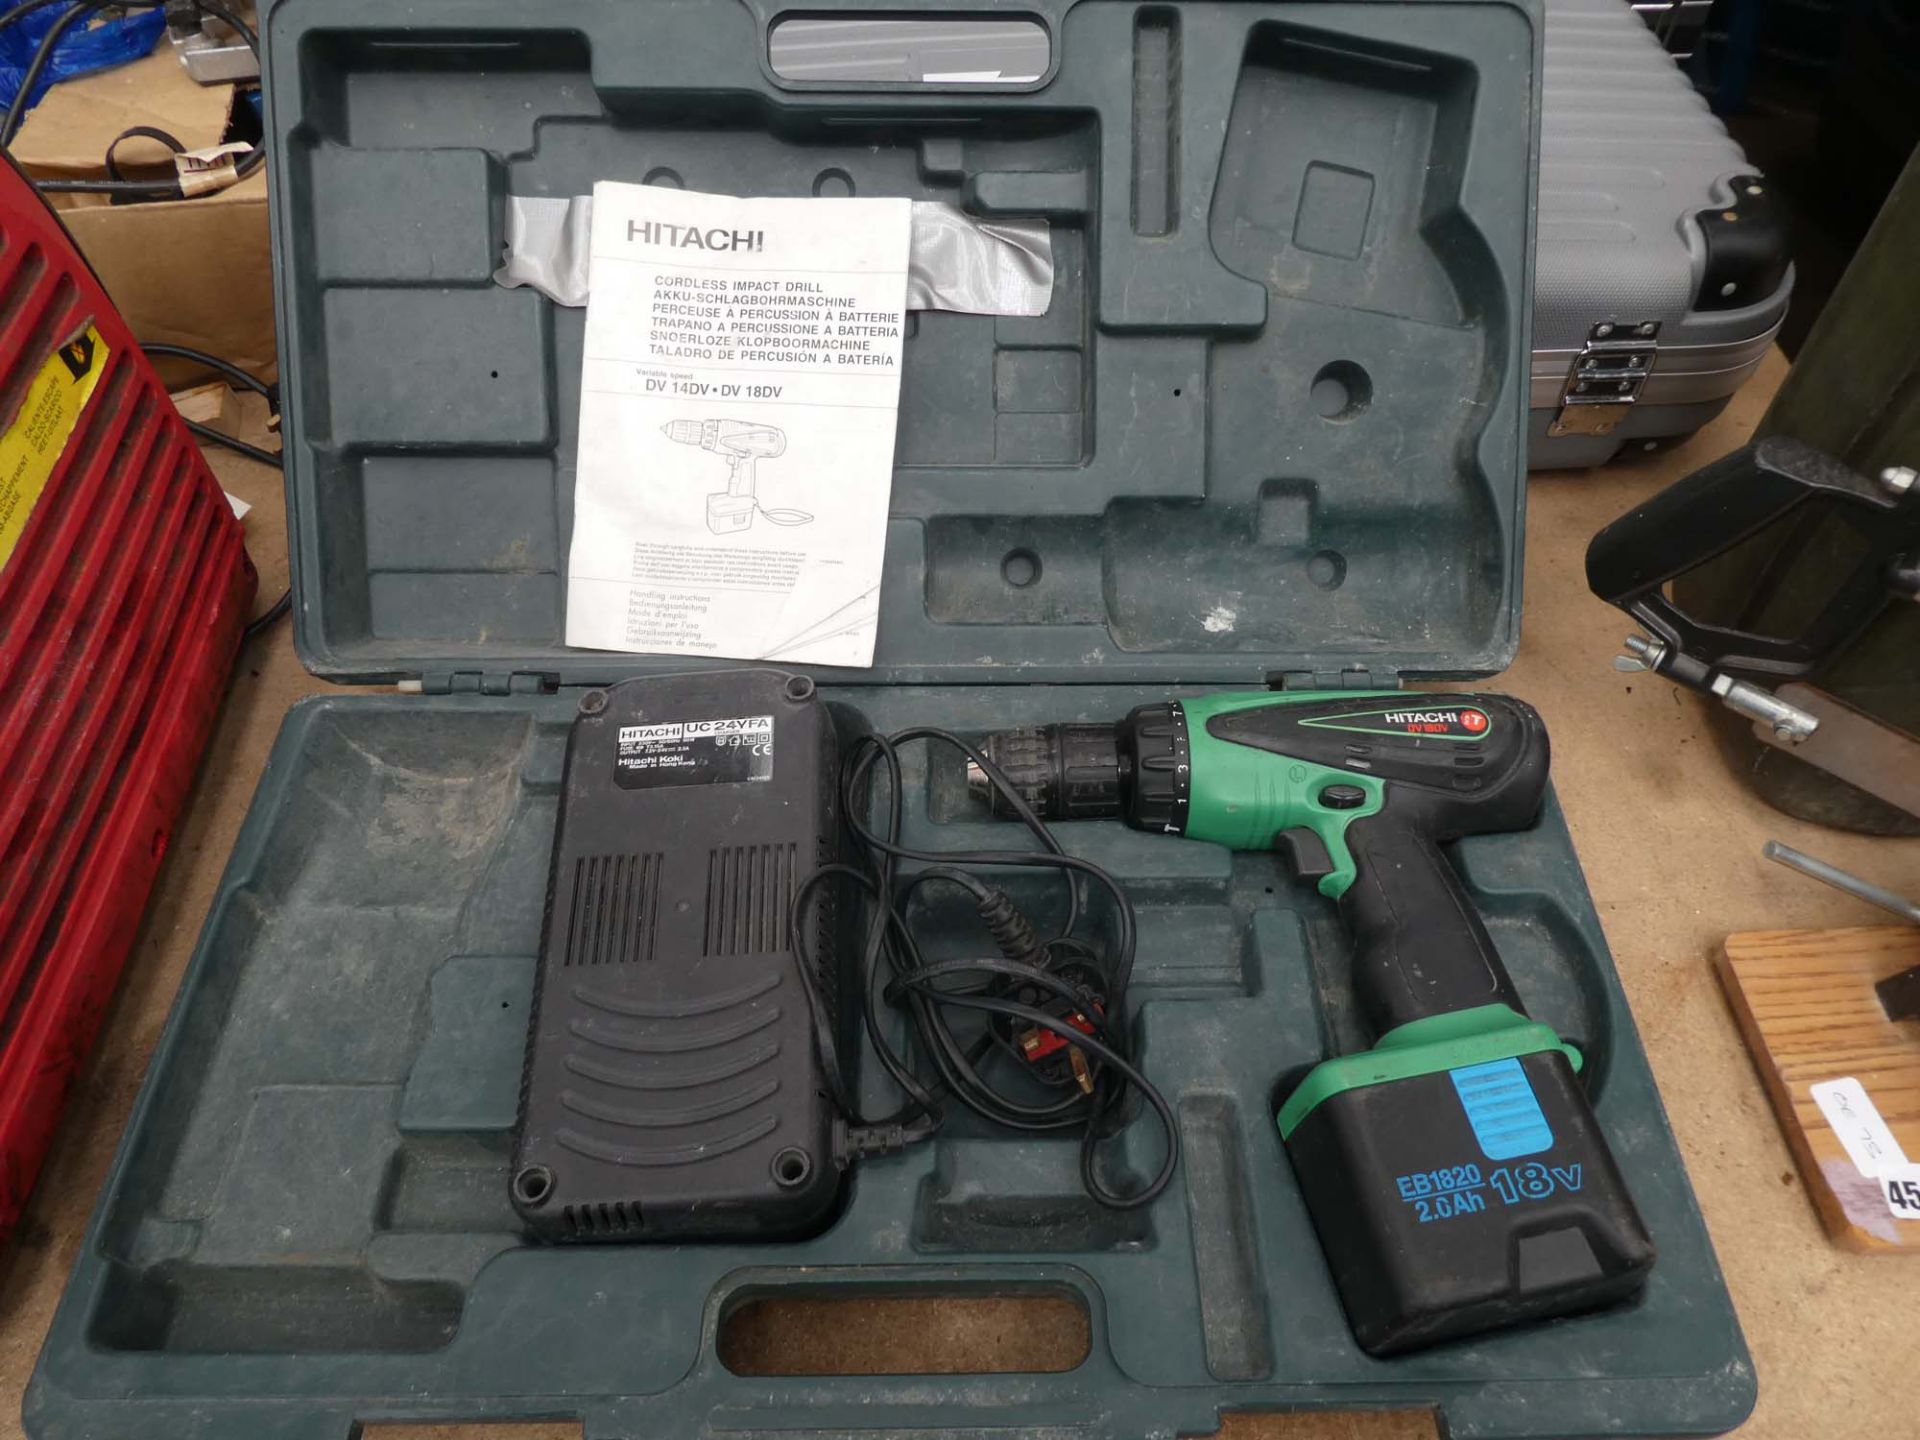 Hitachi battery drill with one battery and charger